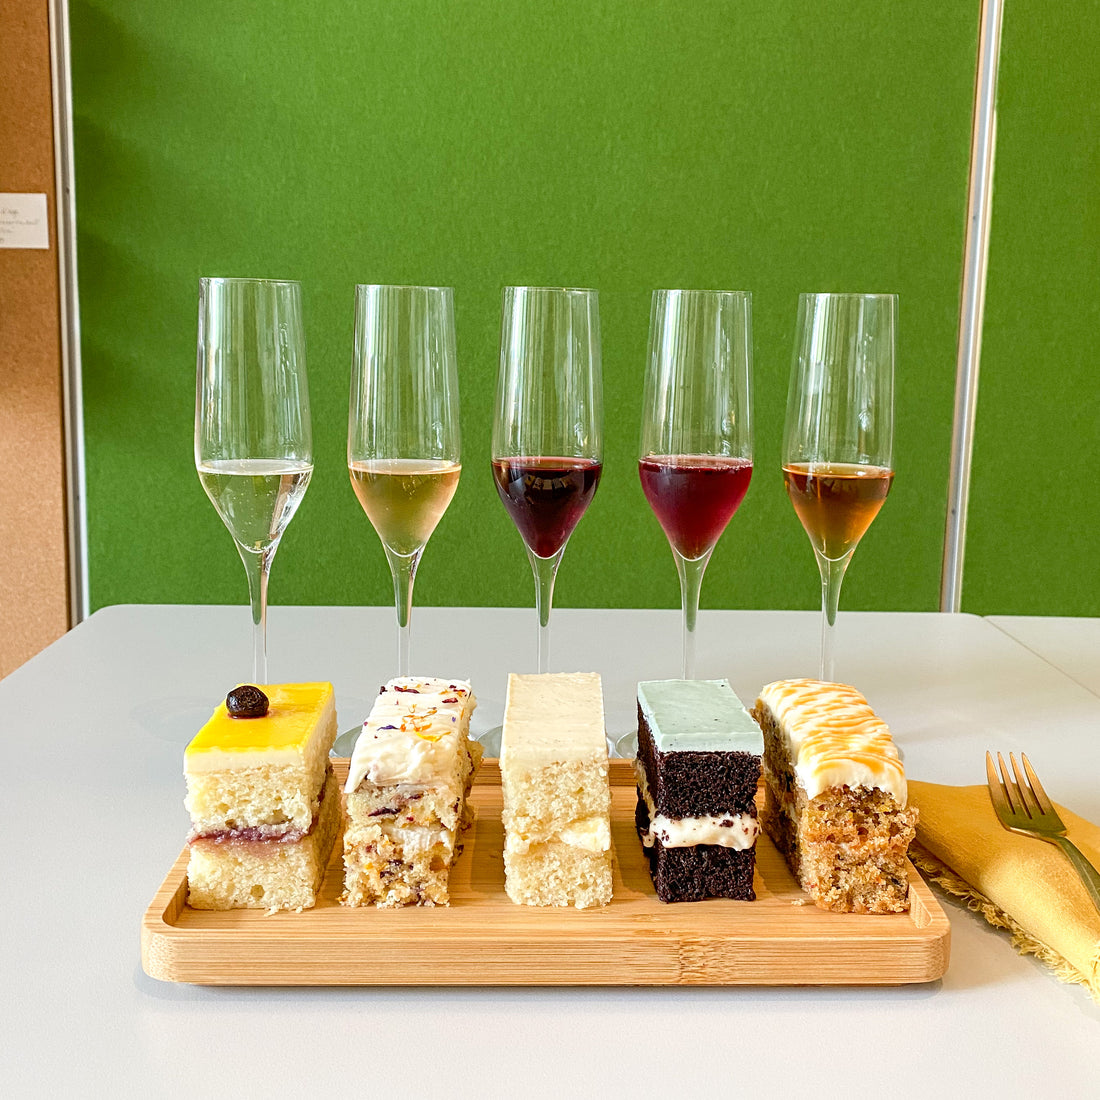 A platter with five rectangular slices of cake, each a different flavor, placed beside five flutes of wine containing 1 ounce tasting portions.